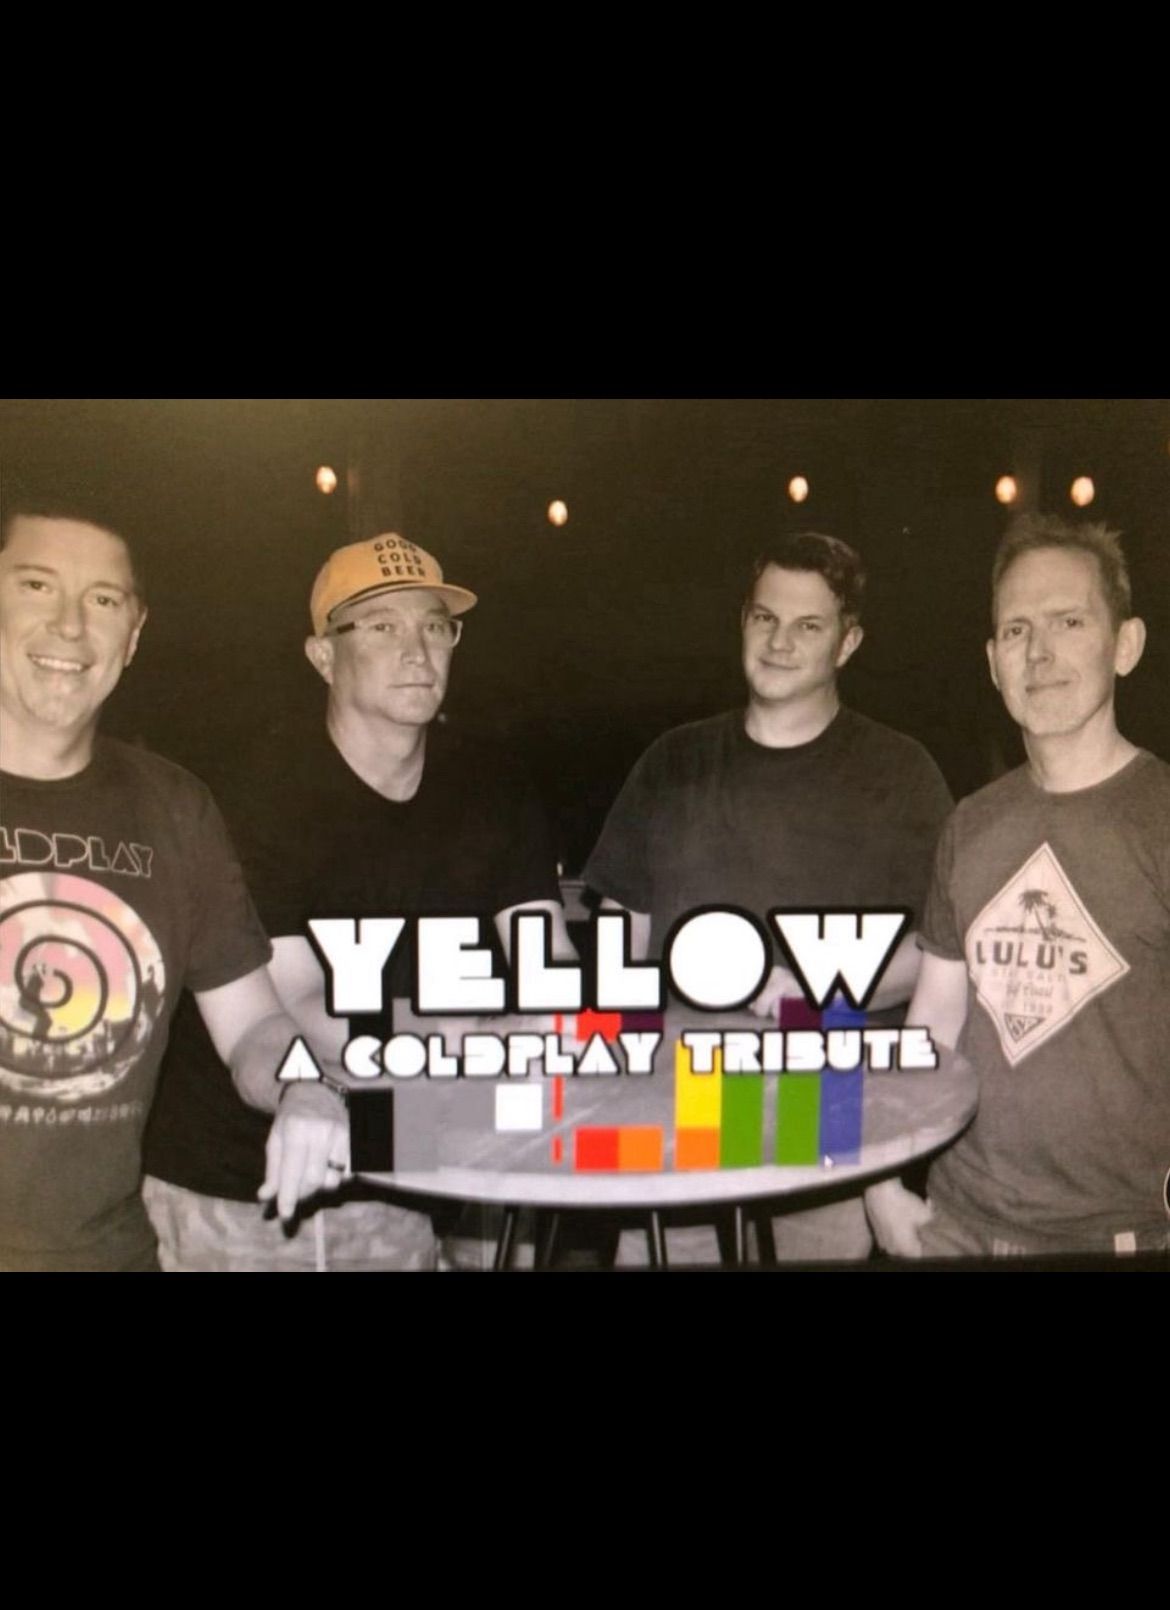 Live at Brew: Yellow - A Coldplay Tribute